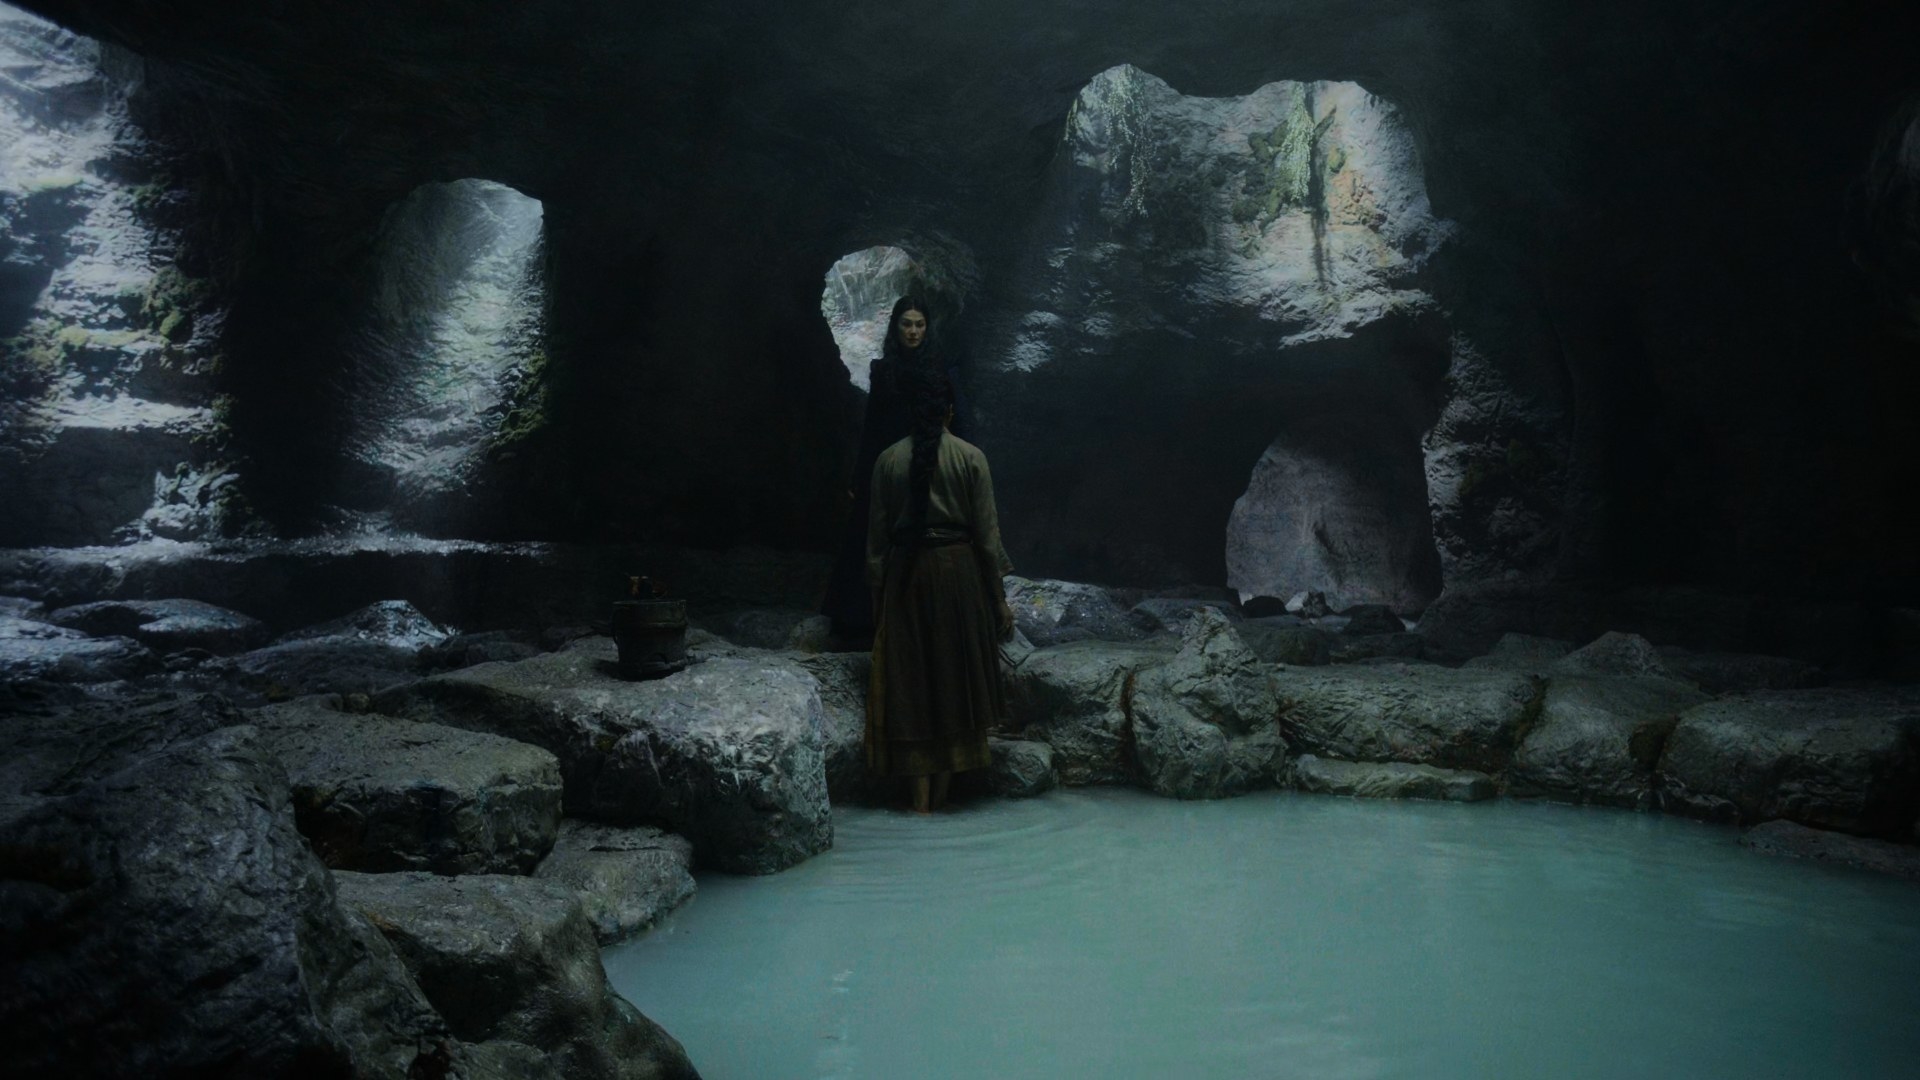 Moiraine and Nynaeve confront each other in a dimly lit cave, with Nynaeve standing in an ankle-deep opaque pool of water